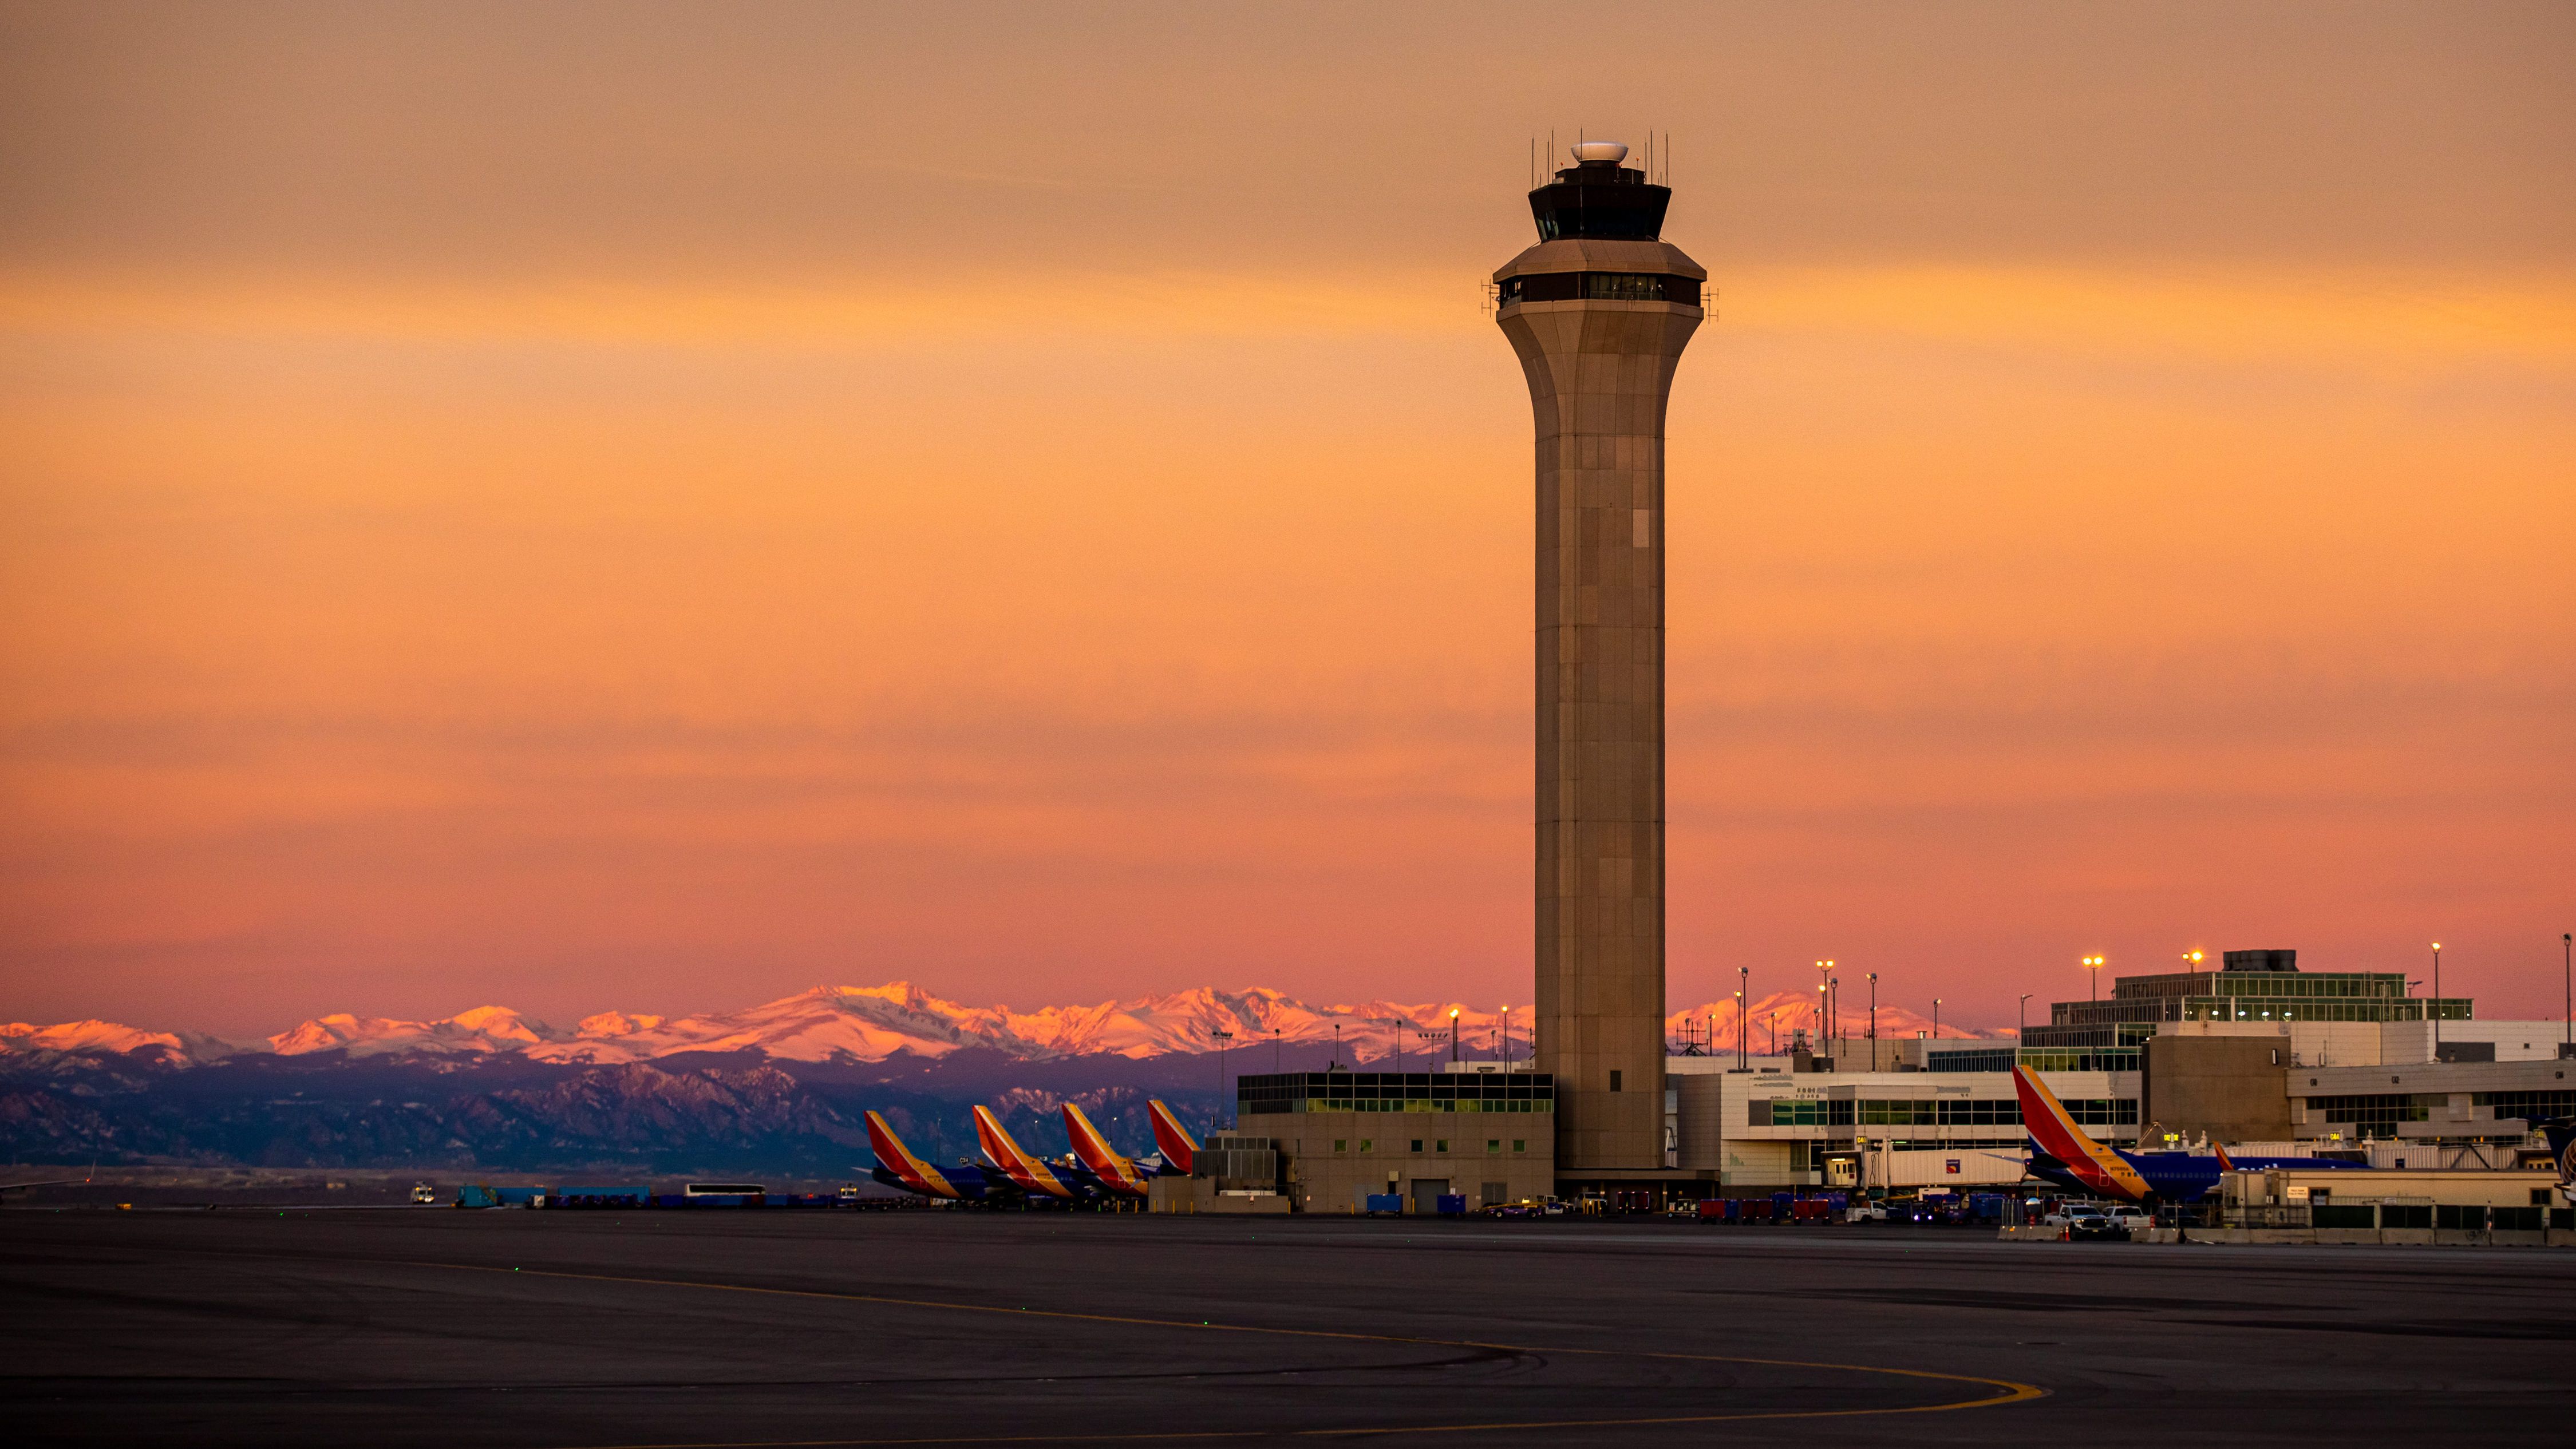 The Denver Airport Air Traffic Control Tower during Sunrise.